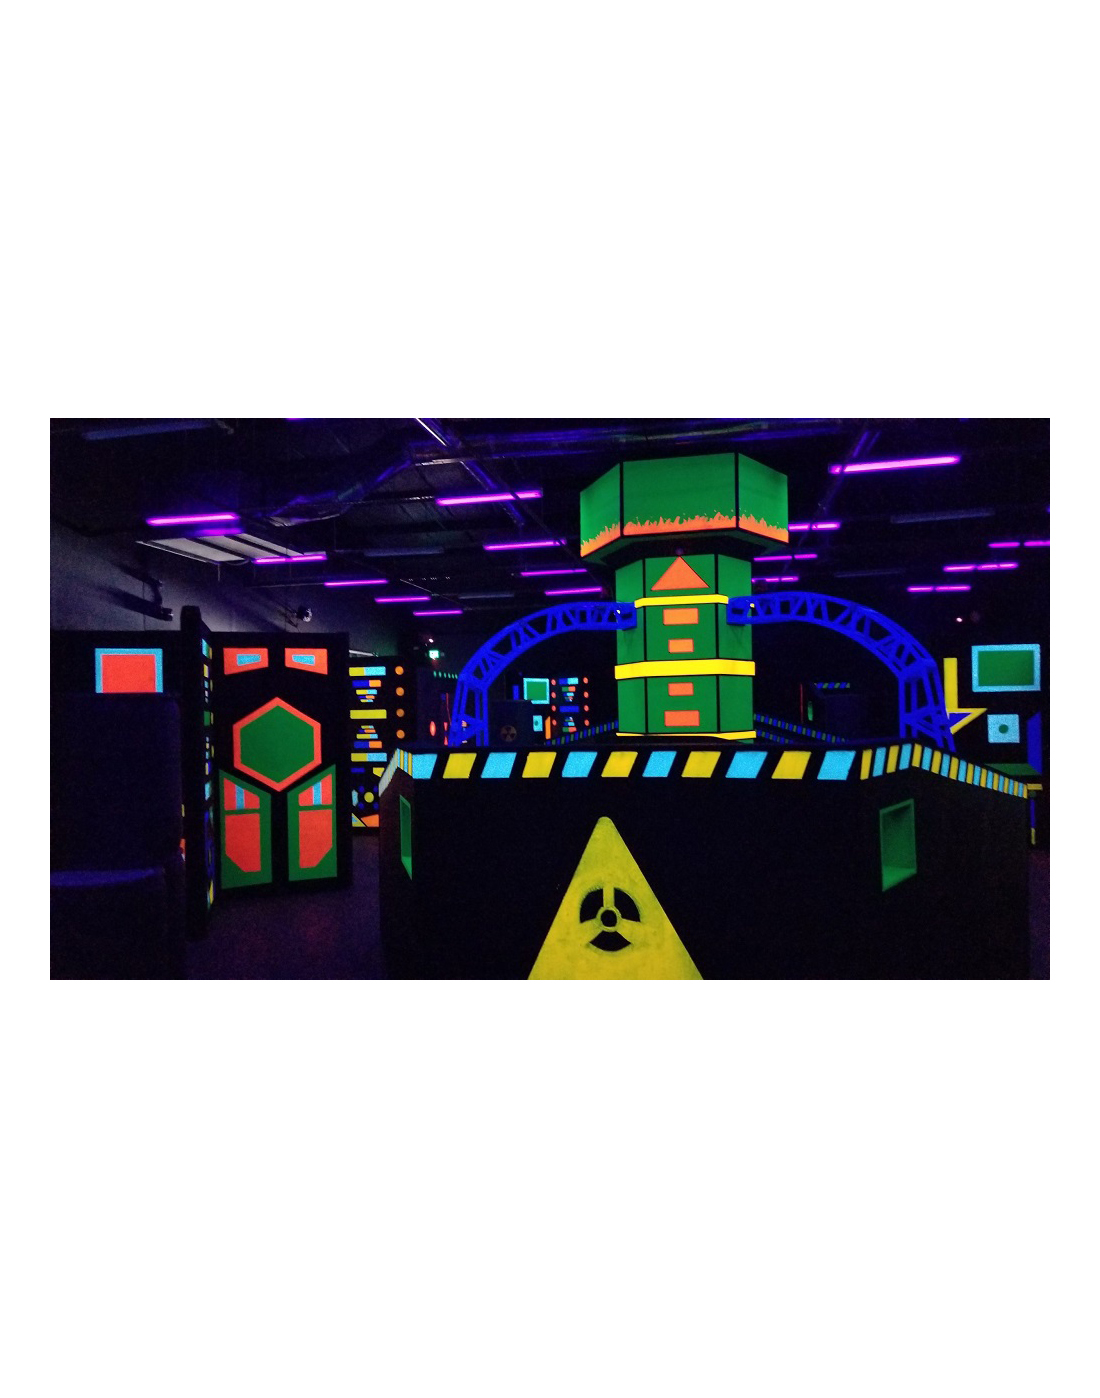 A Dark Themed Laser Room With Dark Colors Painting